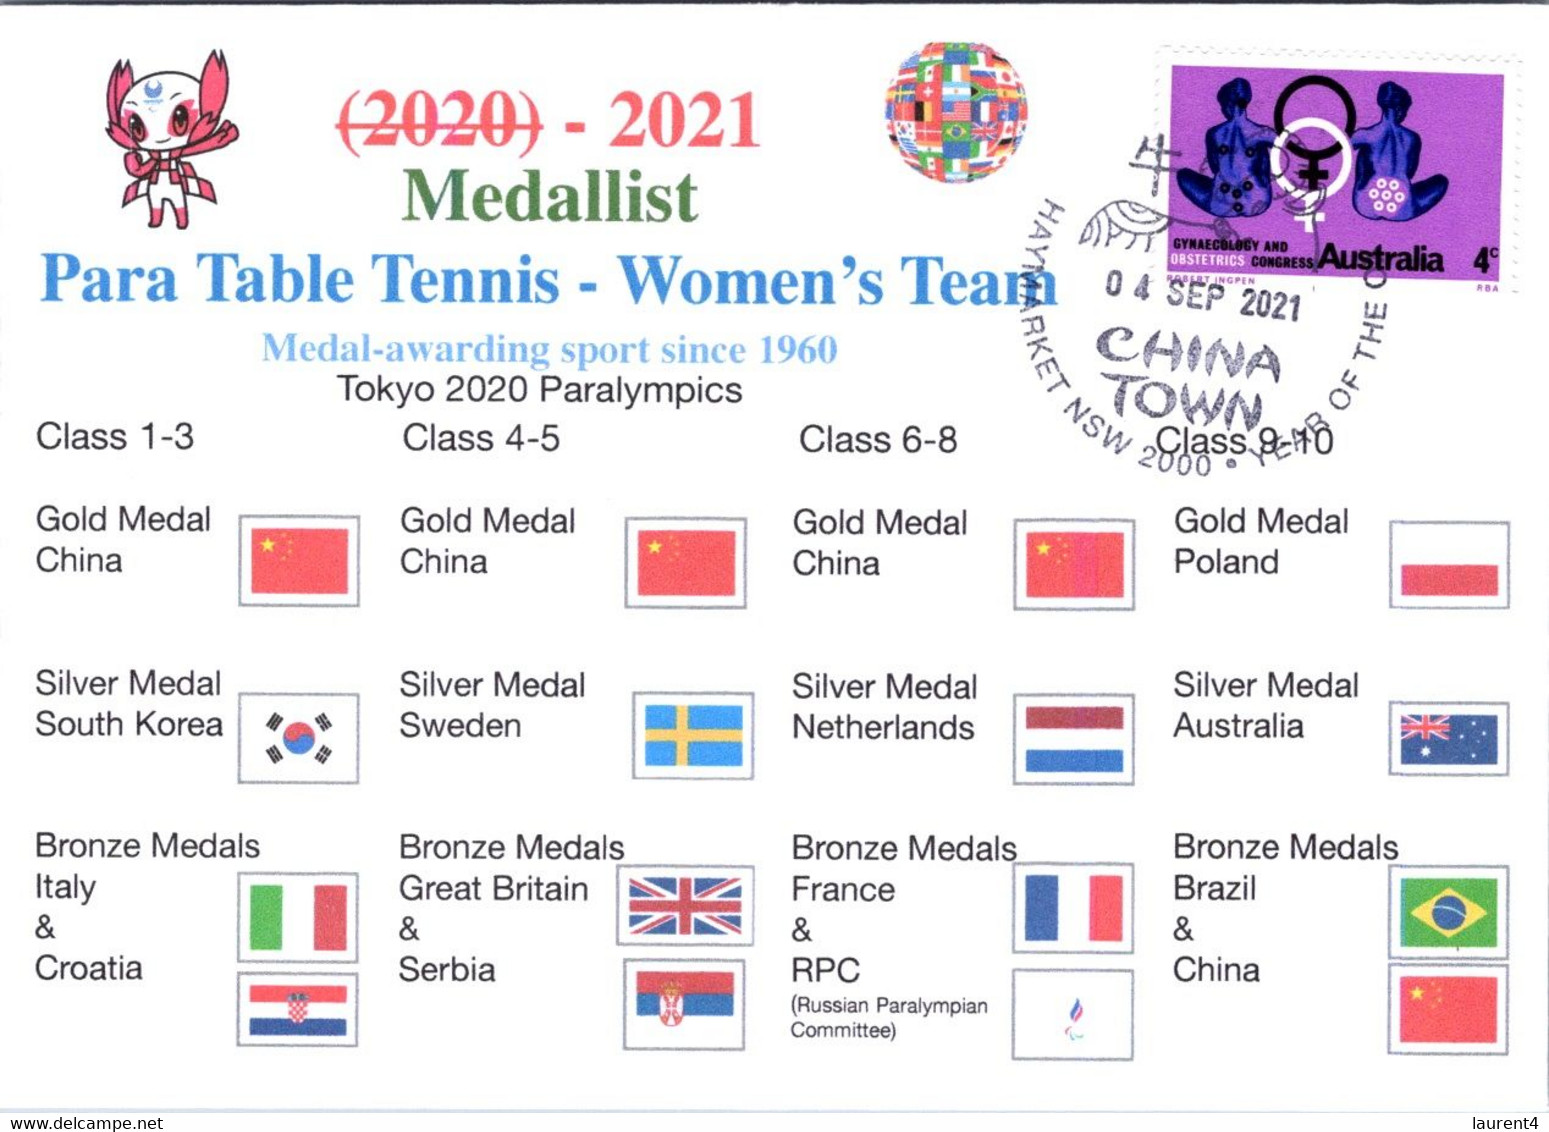 (2 A 9) 2020 Tokyo Paralympic - Medal Cover Postmarked Haymarket - Women's Team Para Table Tennis - Summer 2020: Tokyo